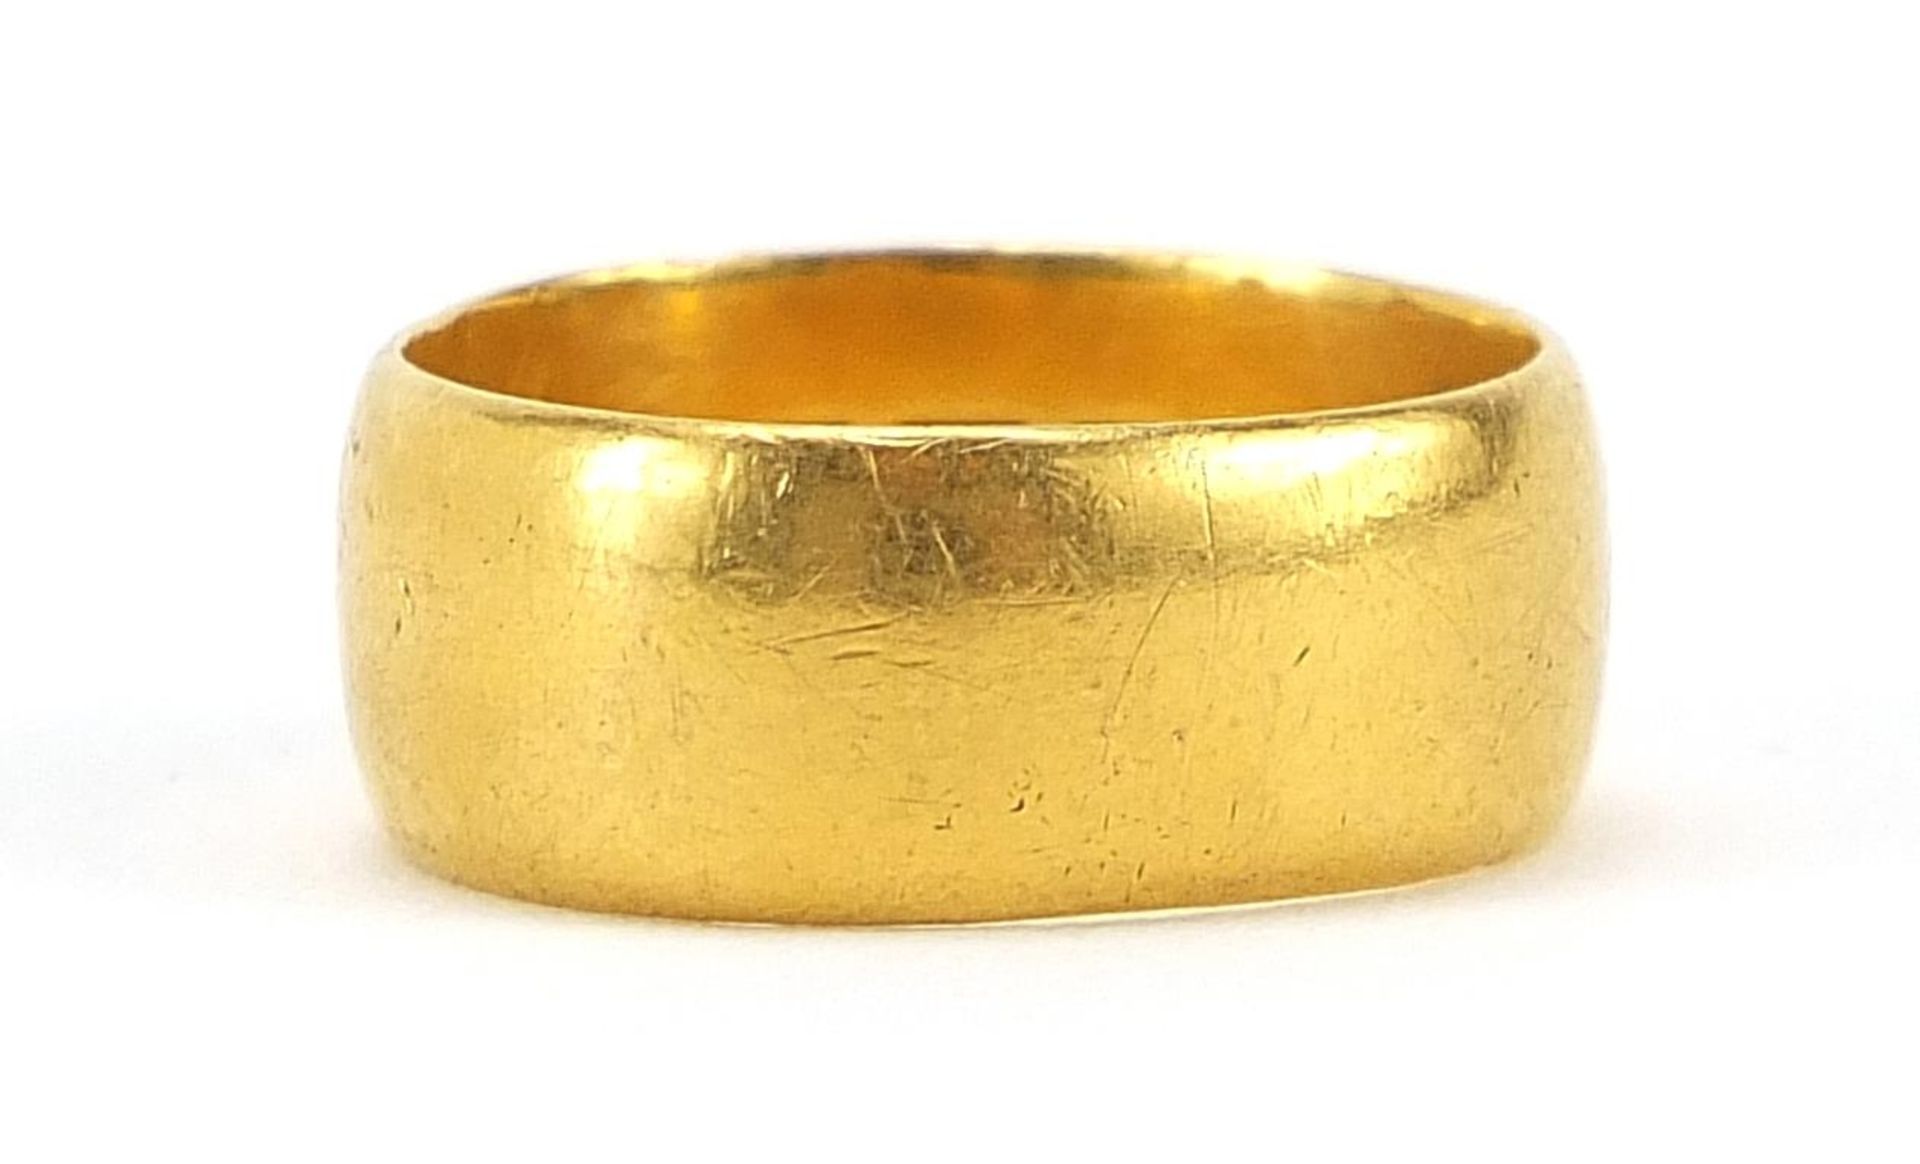 Edwardian 22ct gold wedding band, Birmingham 1909, size I, 5.9g - this lot is sold without buyer's